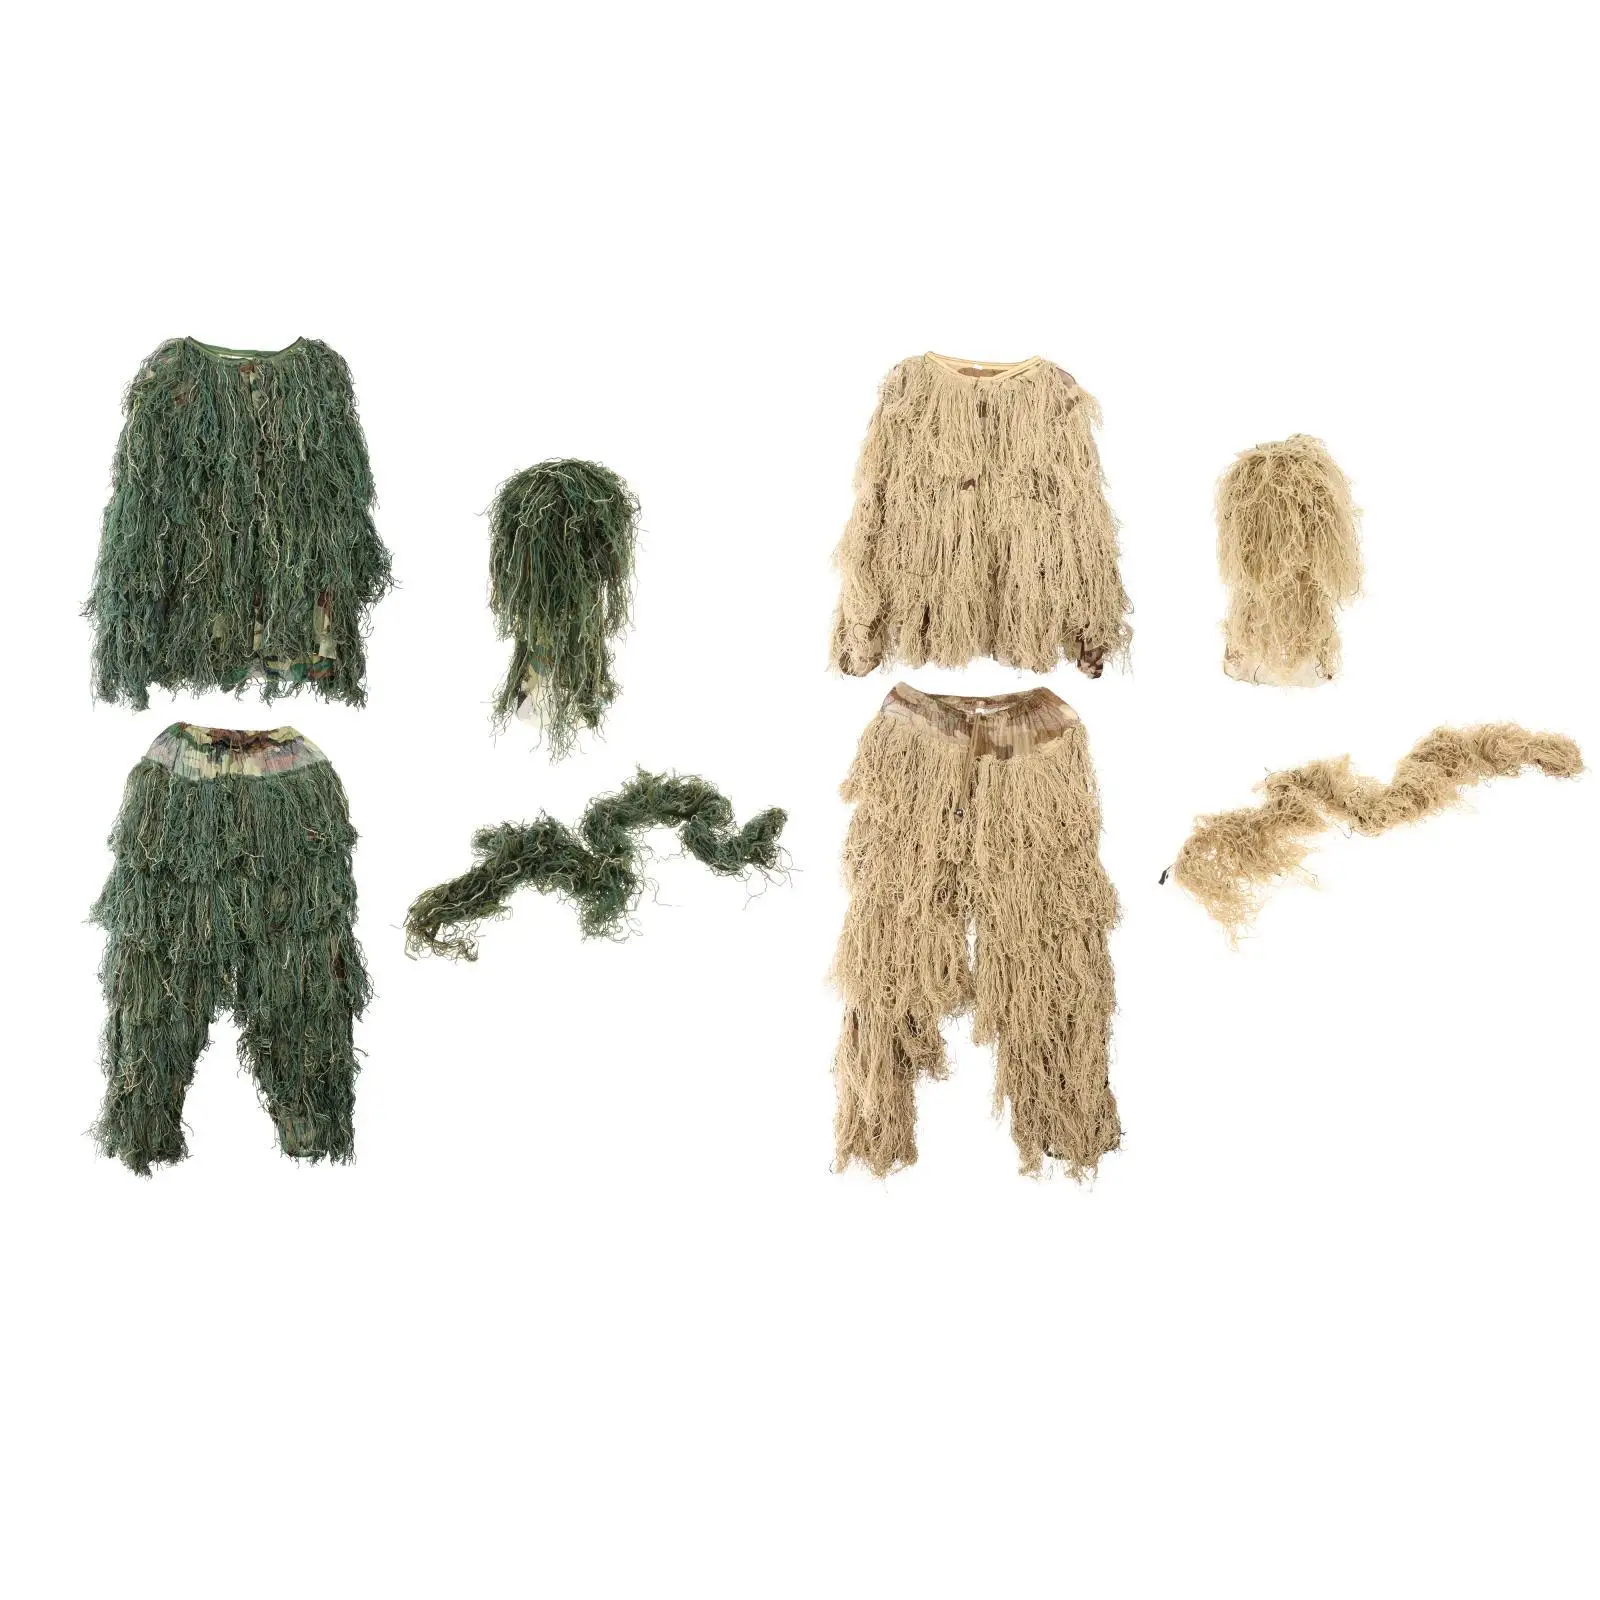 3D  Camouflage Clothing Forest Hunting Sniper Ghillie Suit Woodland